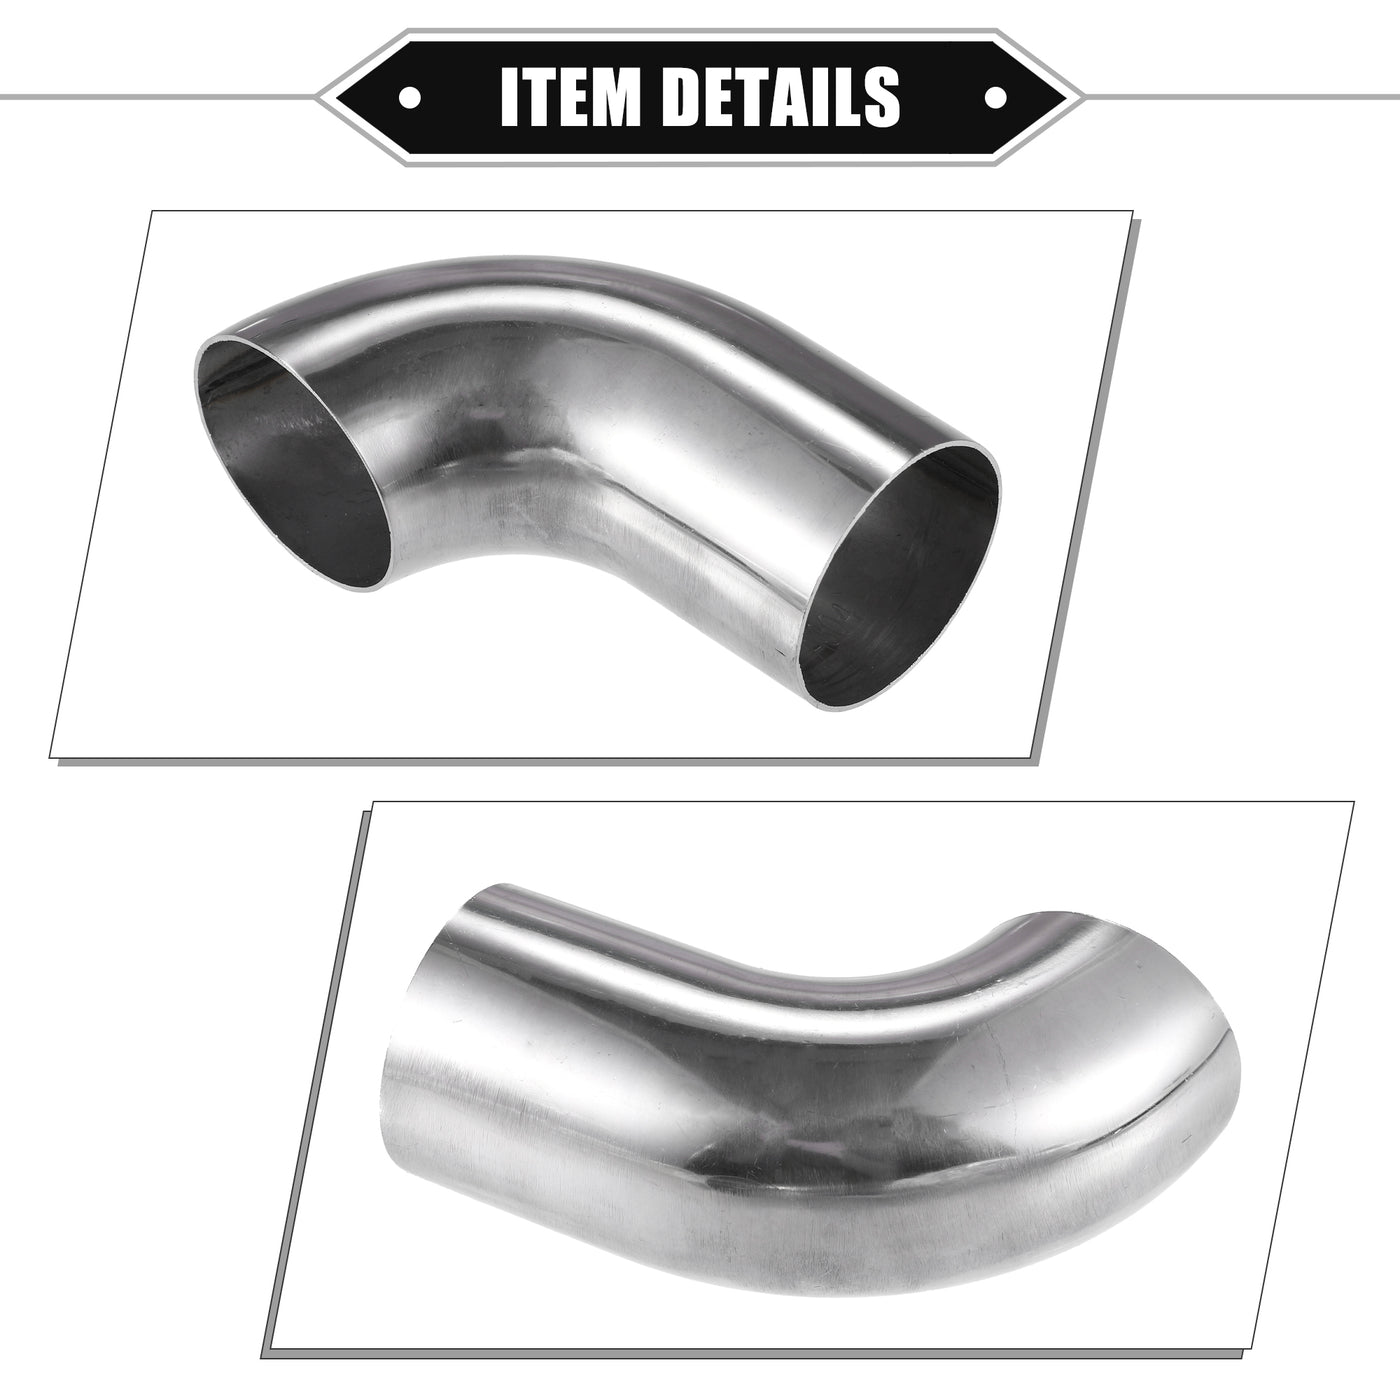 VekAuto 2 Pcs Bend Elbow Pipe Tube, 2" OD 4.72" 3.15" Leg 90 Degree DIY Exhaust Pipe Intercooler Air Intake Tube Universal for Car Truck Durable 304 Stainless Steel Silver Tone